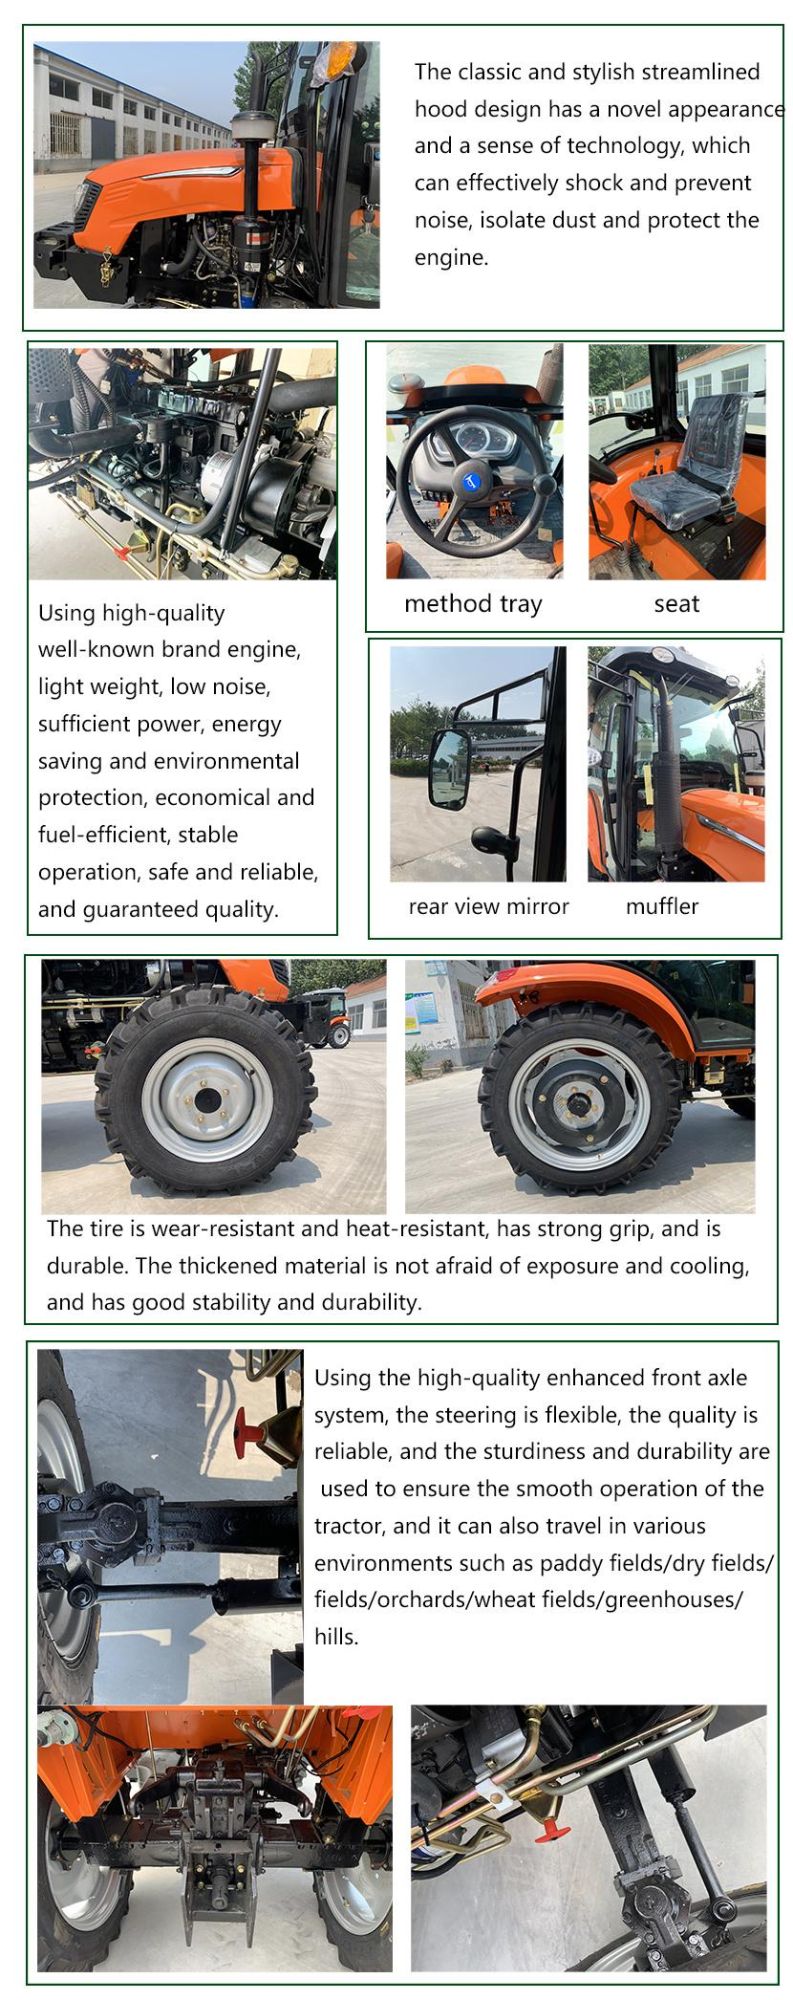 90% New Agricultural Machinery/Second Hand/Hot Sale / Mini /Small/4*4 Diesel Engine/Electric Tractor